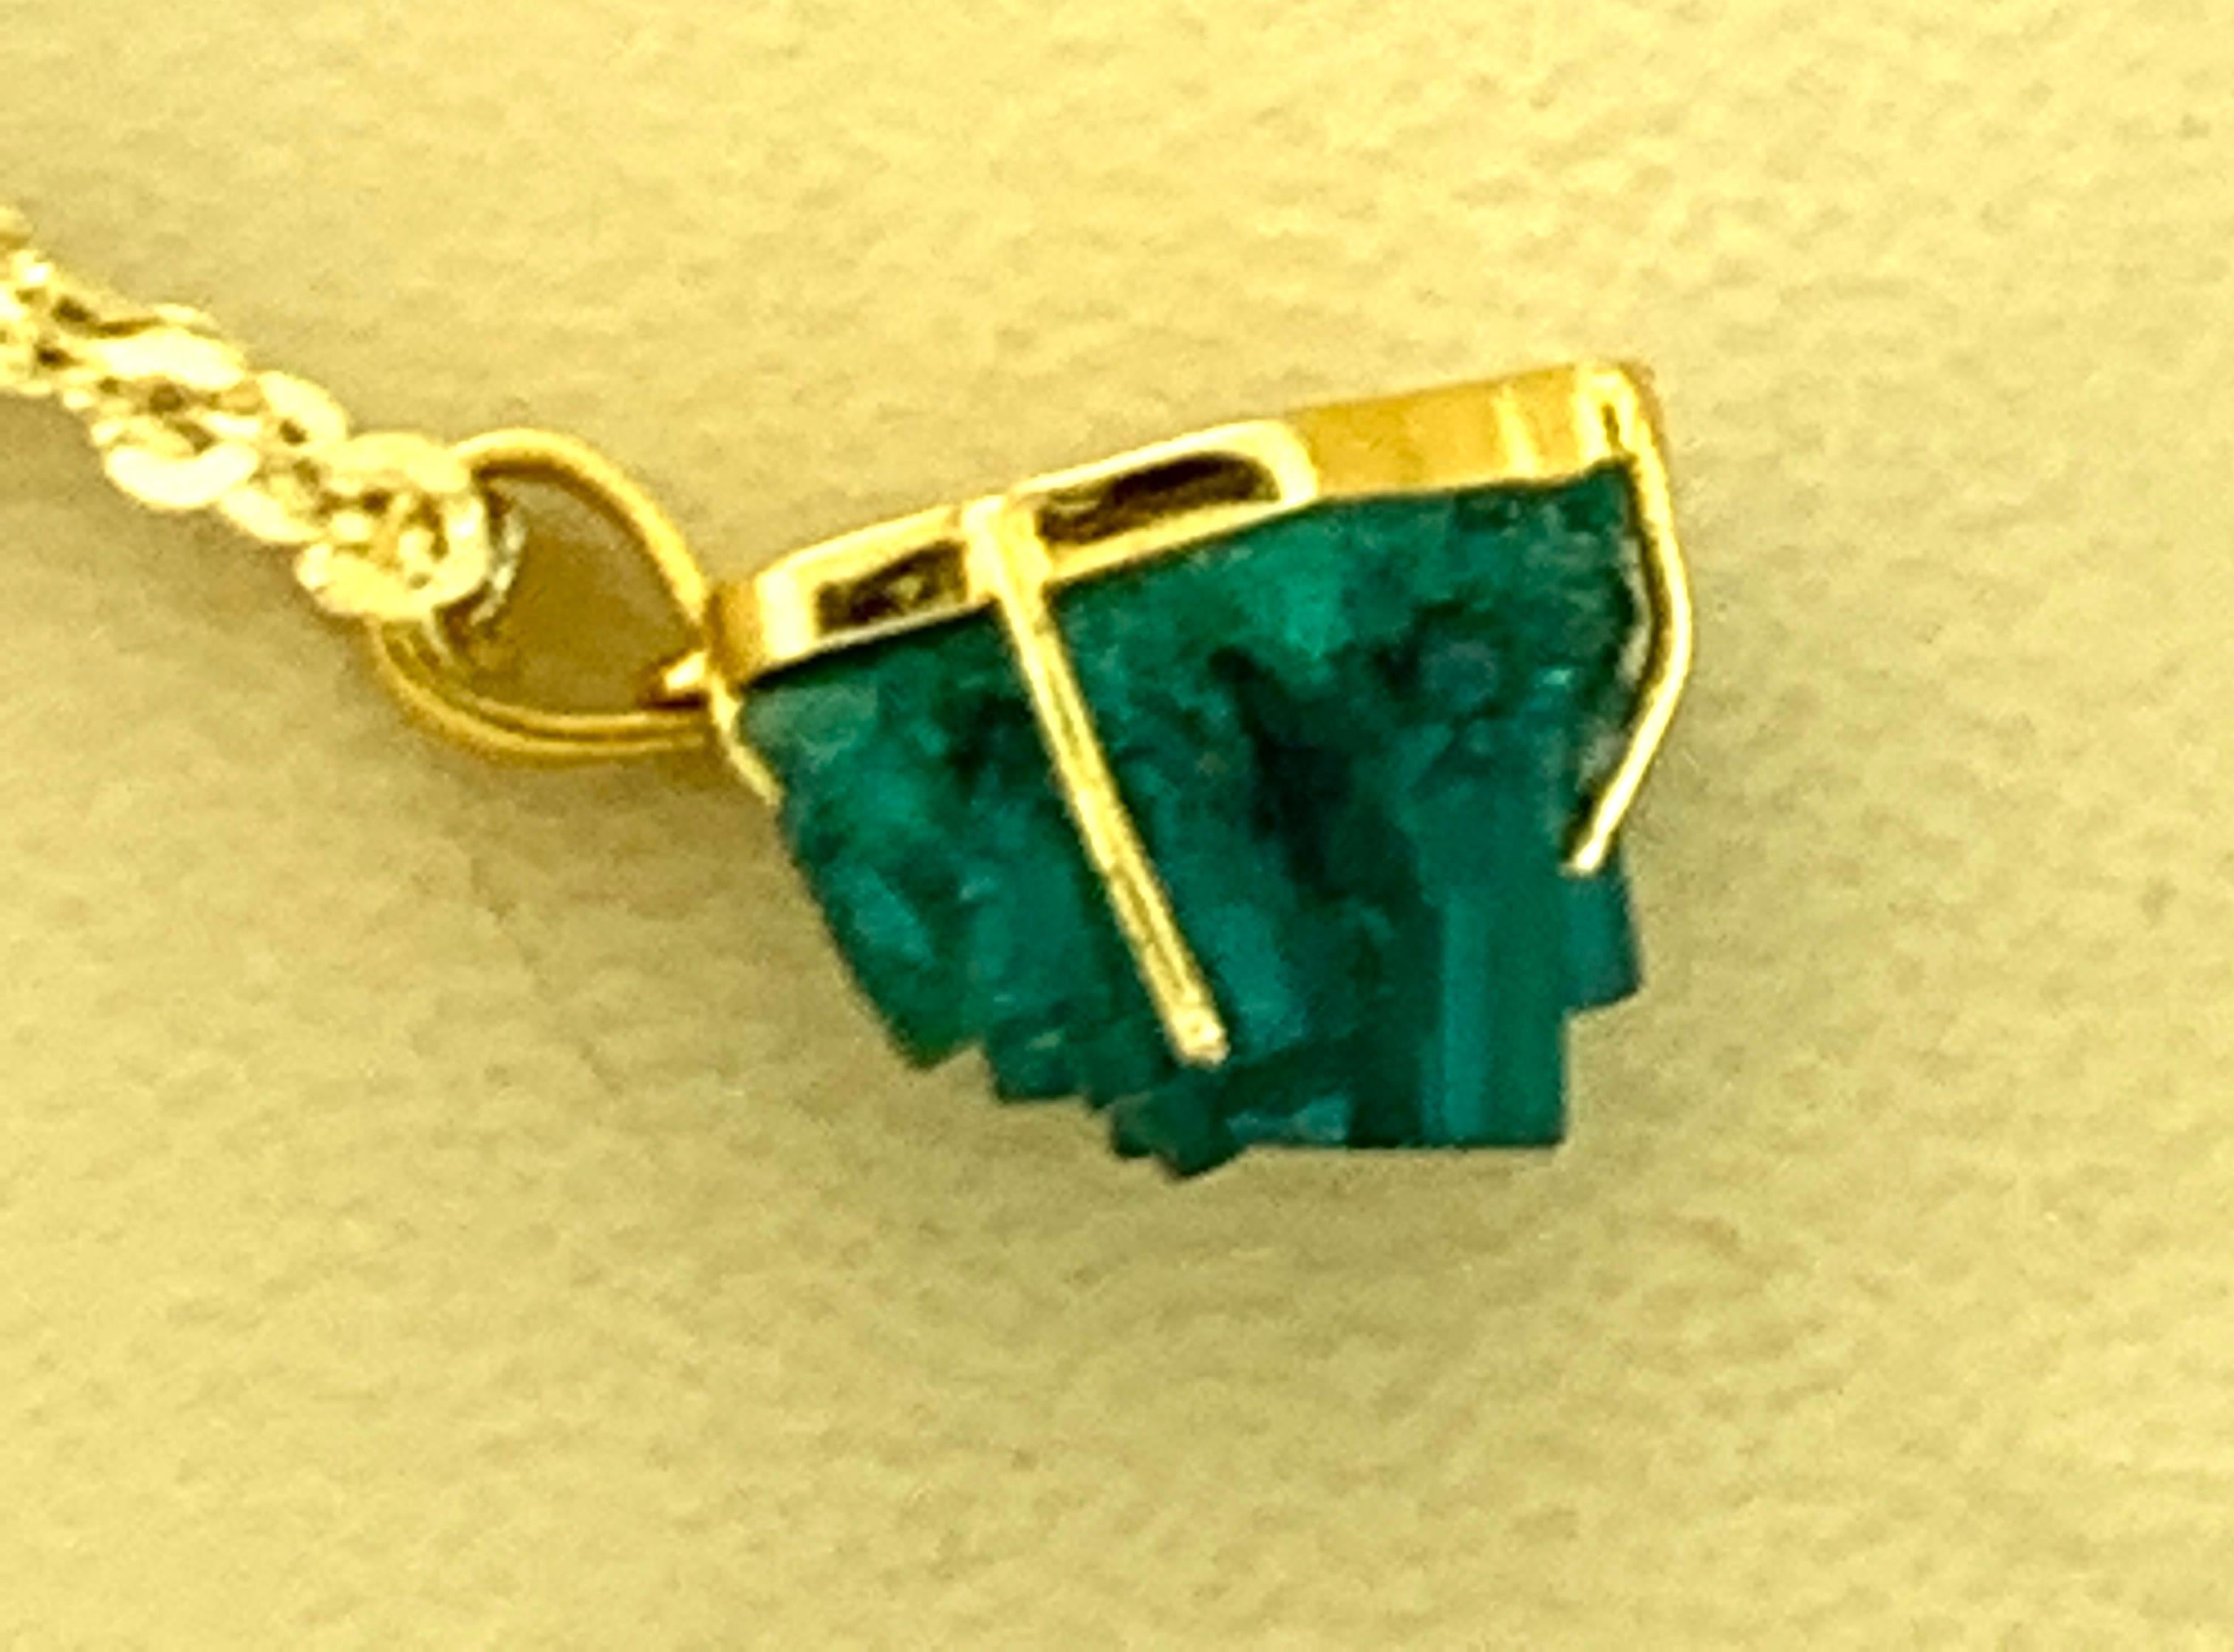 Emerald Cut 19 Carat Colombian Emerald Rough Pendent/Necklace 18 Karat Gold with Chain